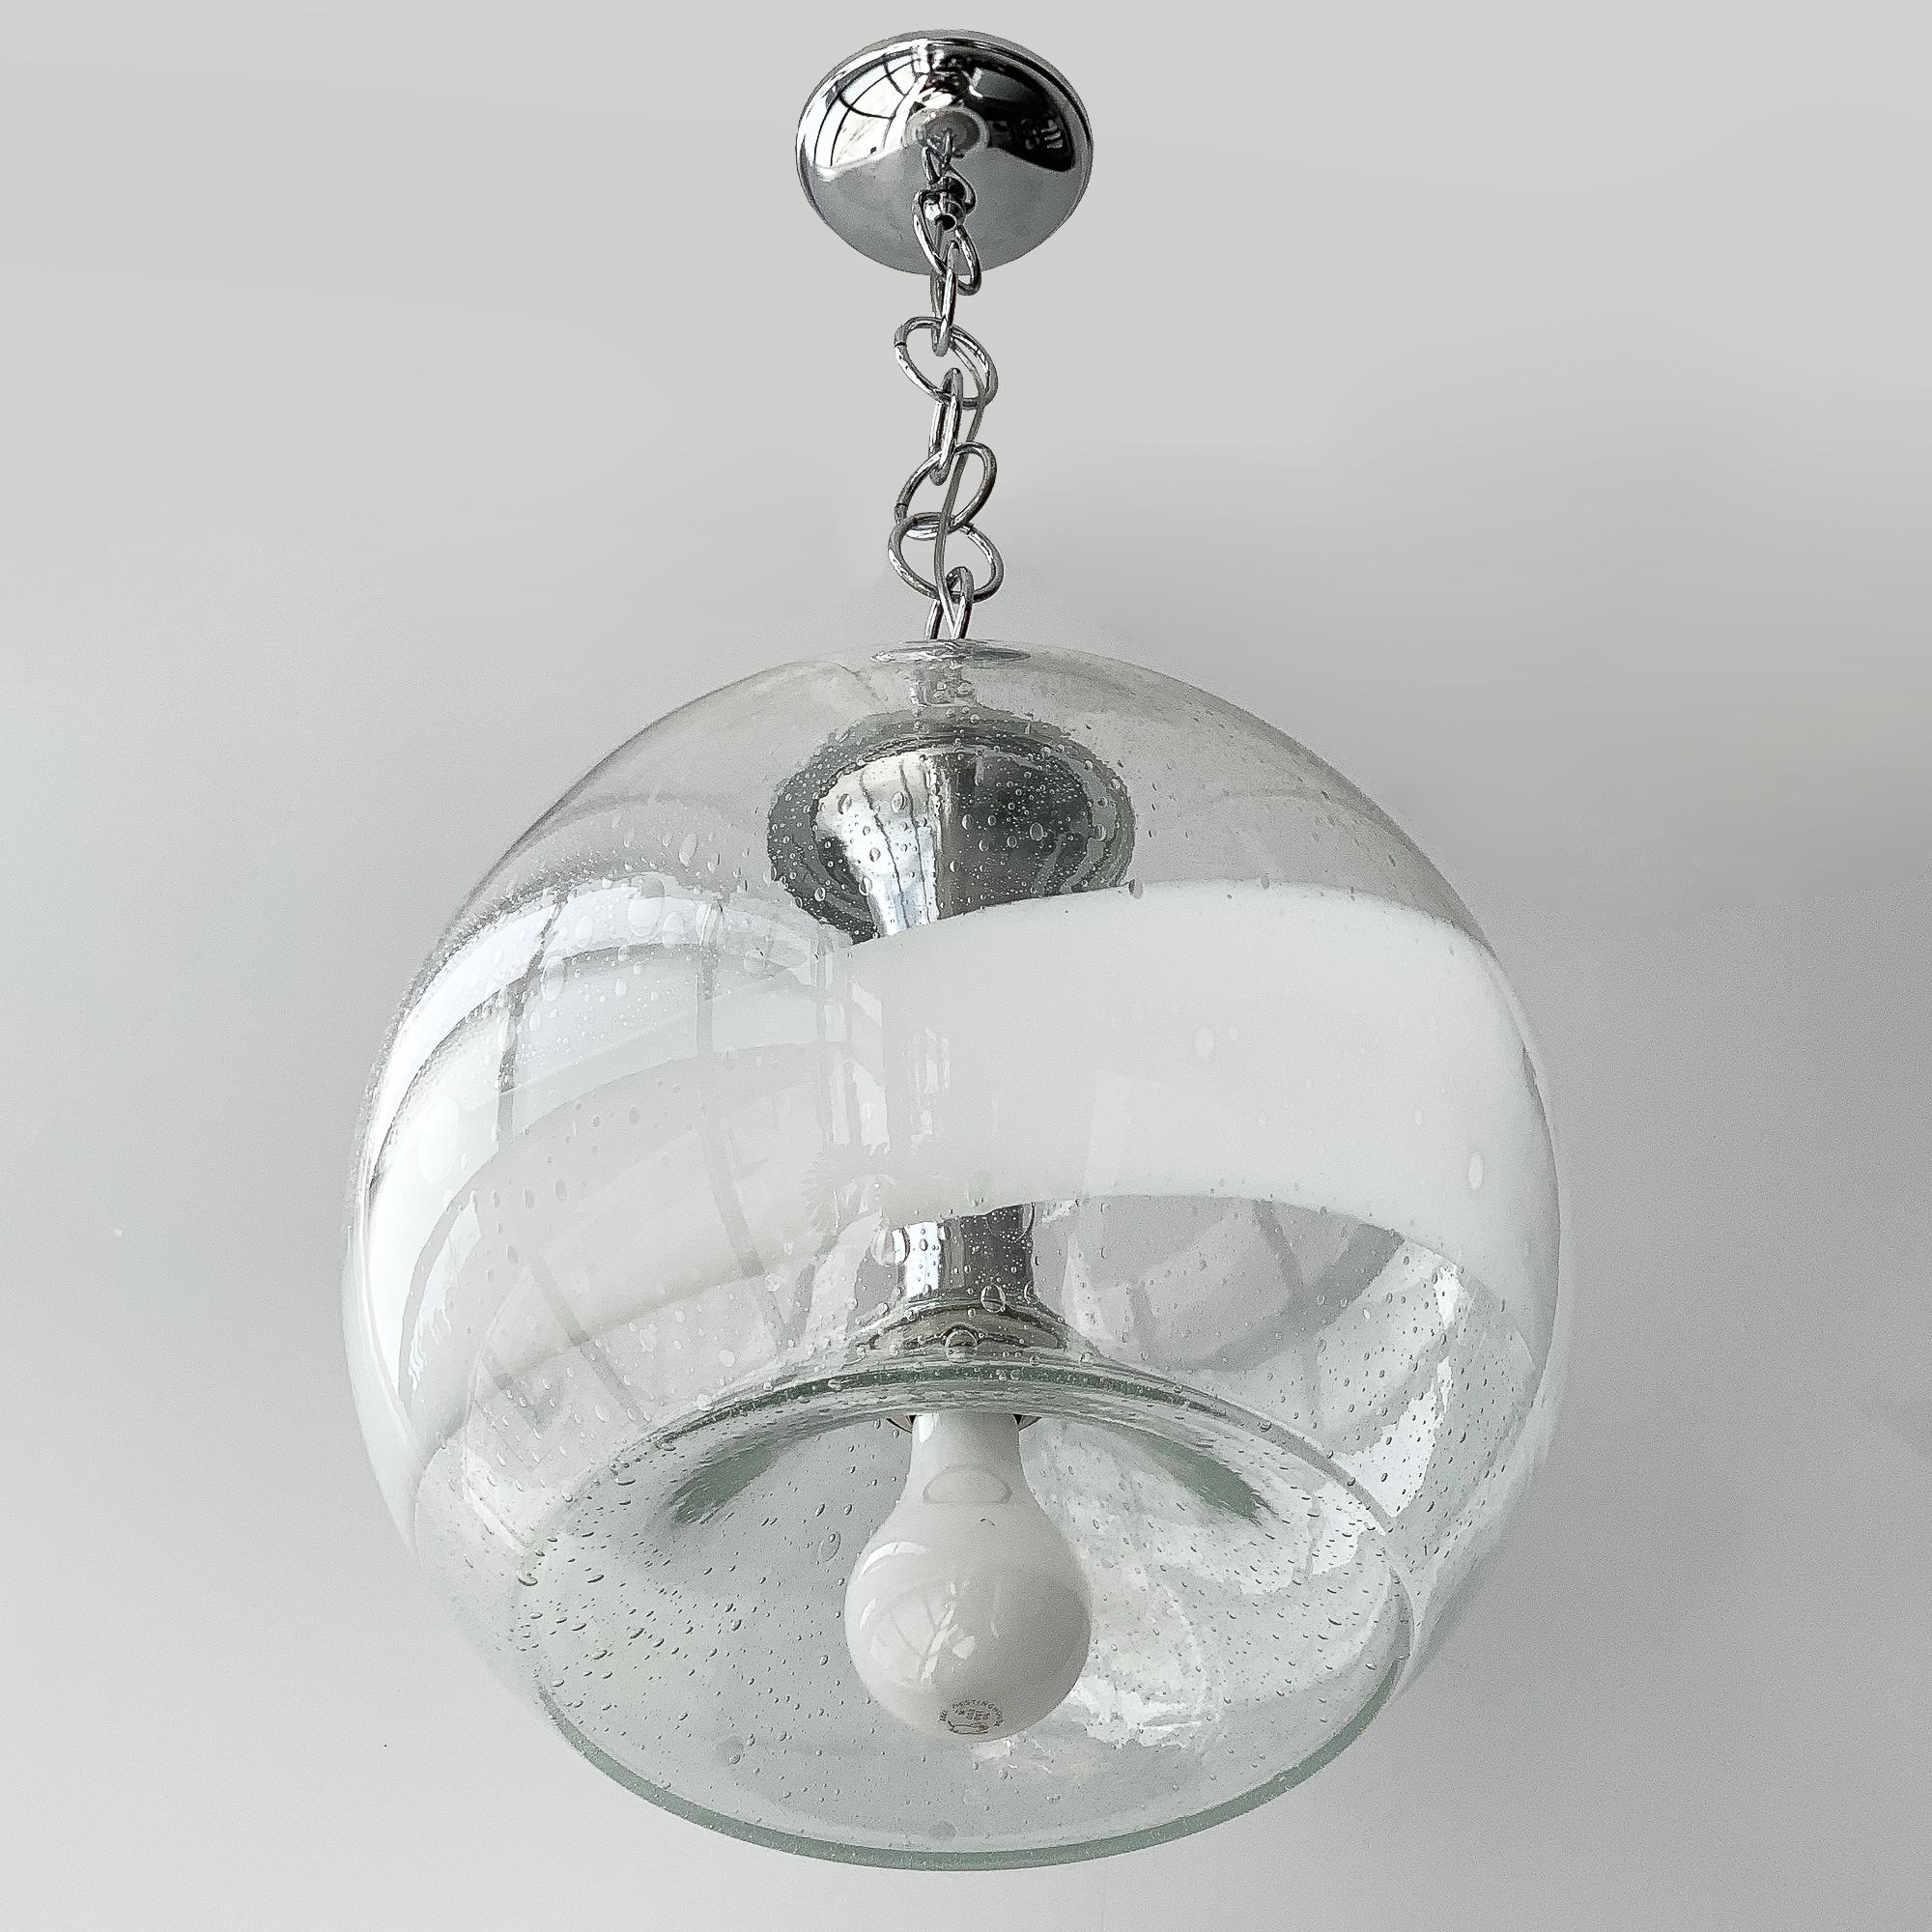 Italian globe pendant chandelier in clear bubbled glass with a wide band of white by Mazzega, circa 1970s. Sphere shaped Murano glass with inverted bottom and recessed socket. Takes one standard base light bulb. Chrome cylinder shaft, cap, circular